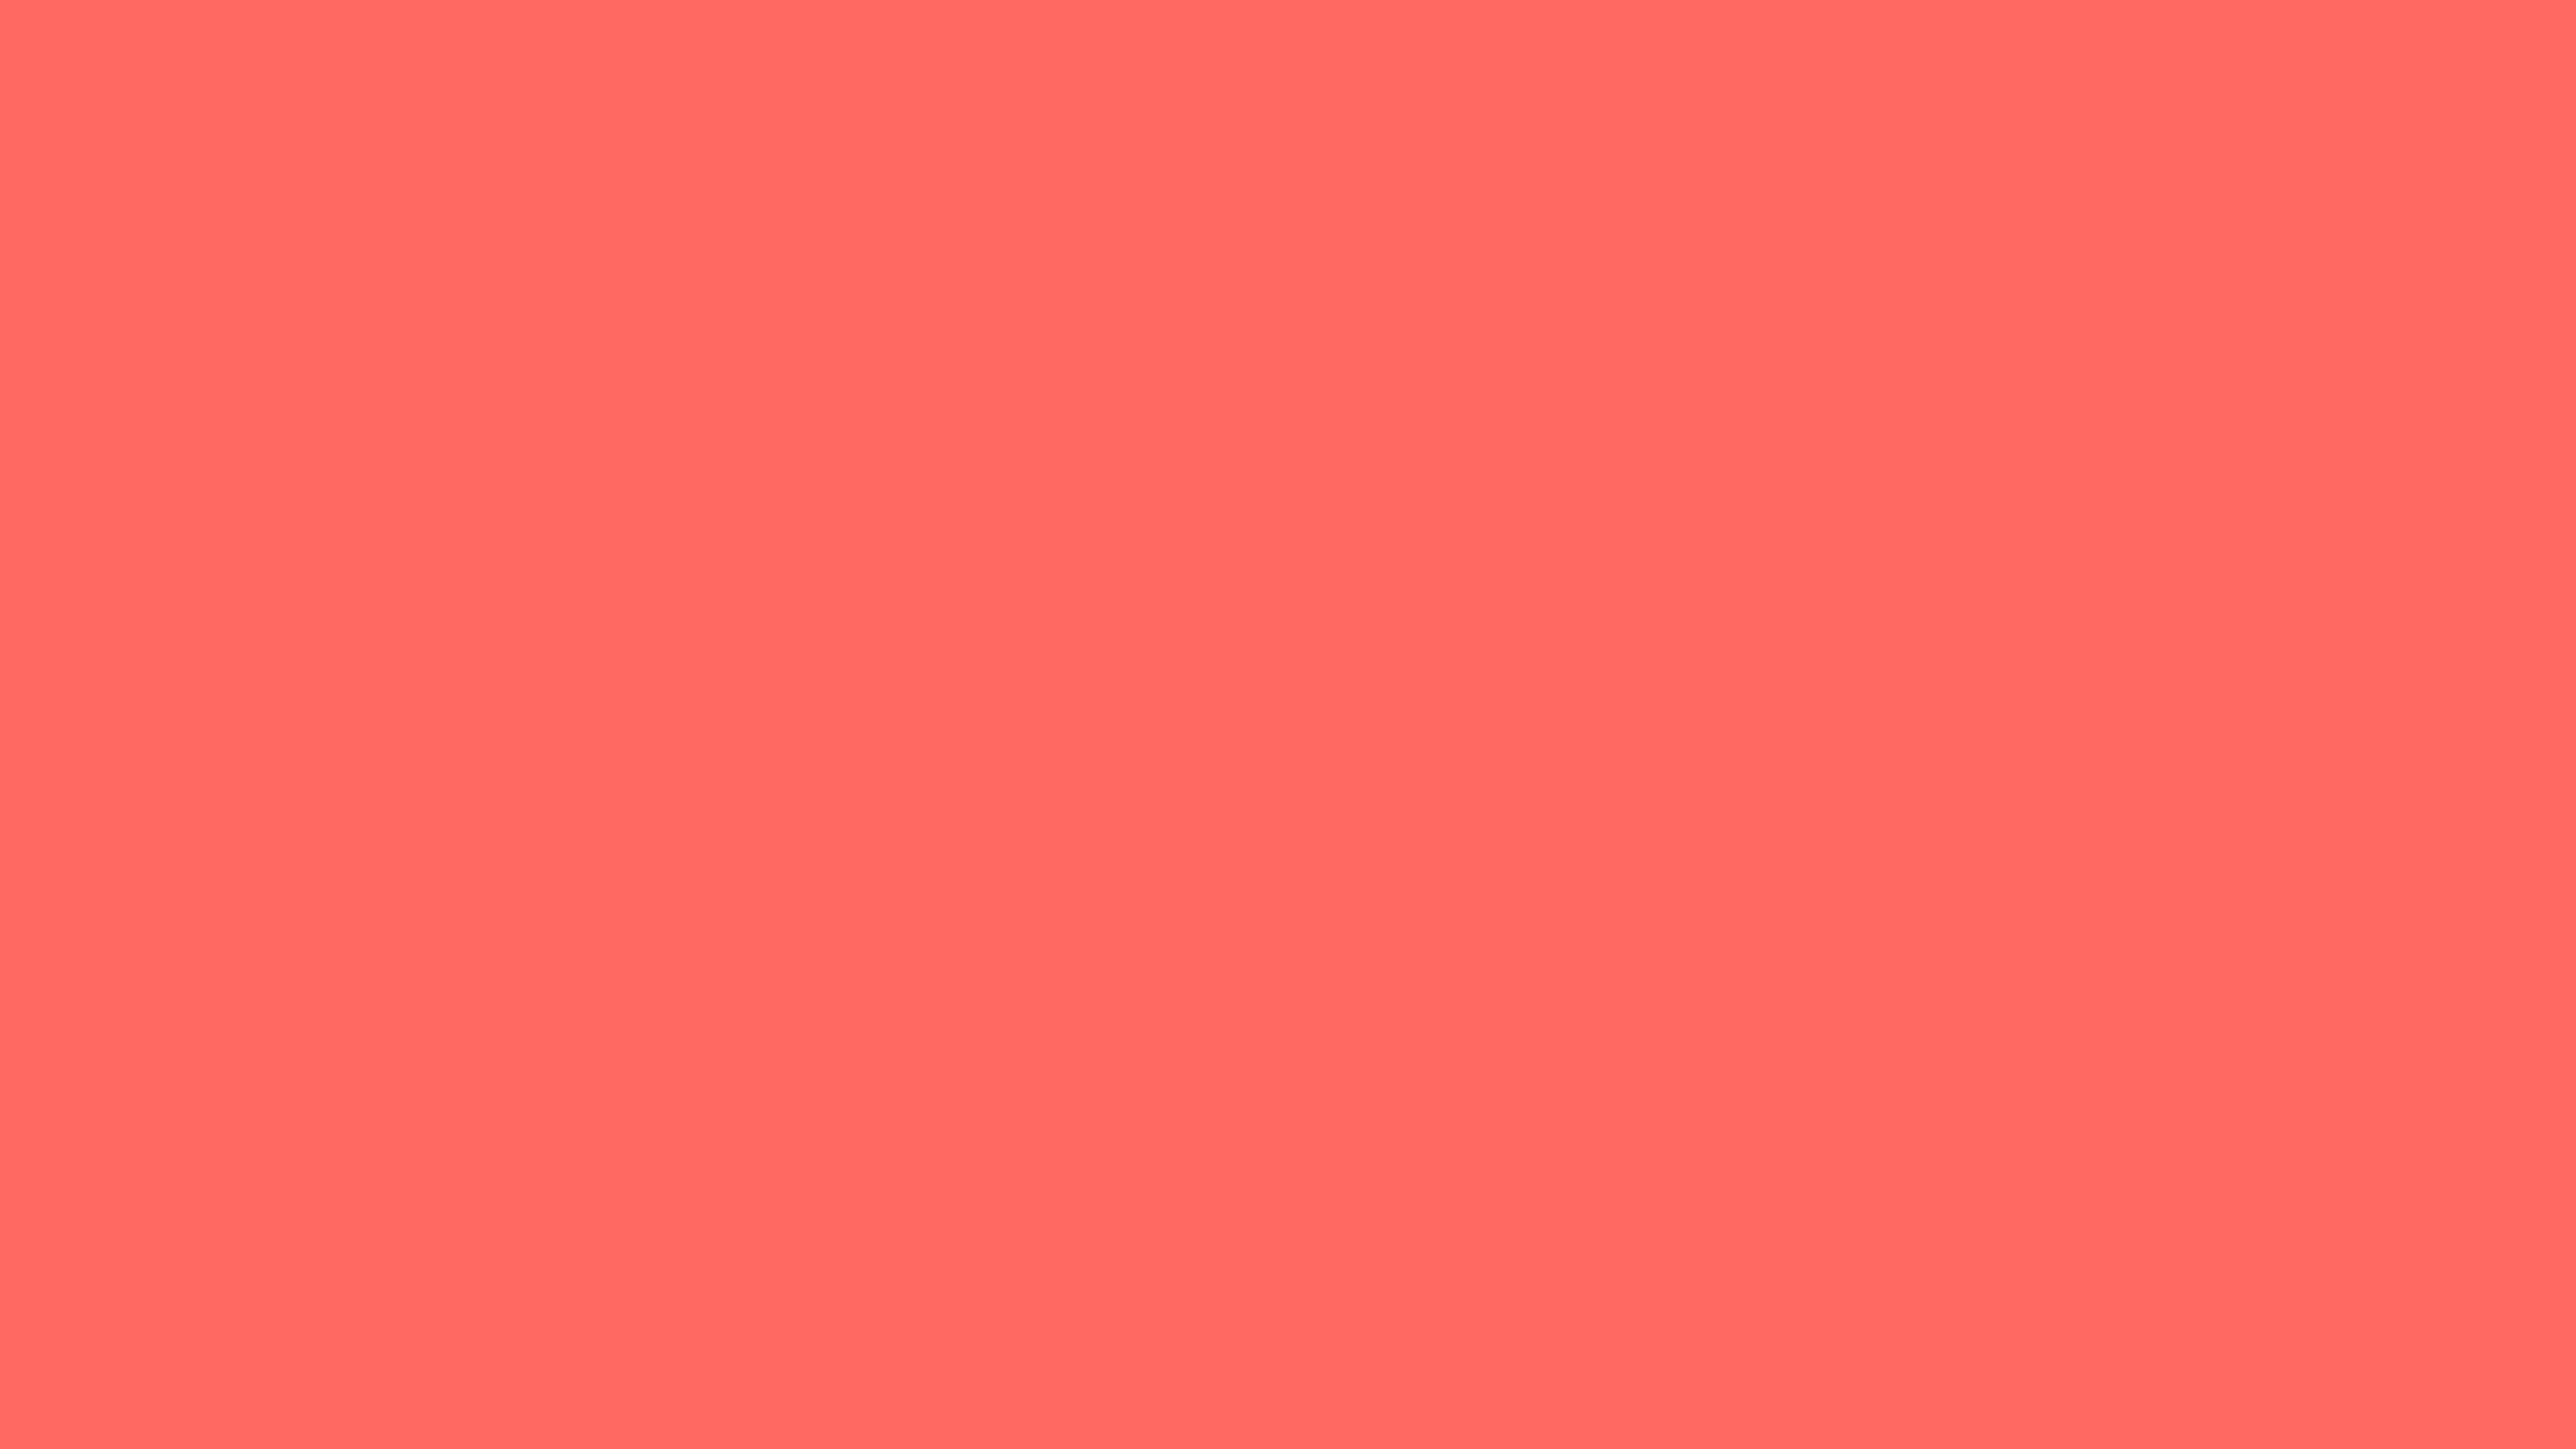 4096x2304 Pastel Red Solid Color Background